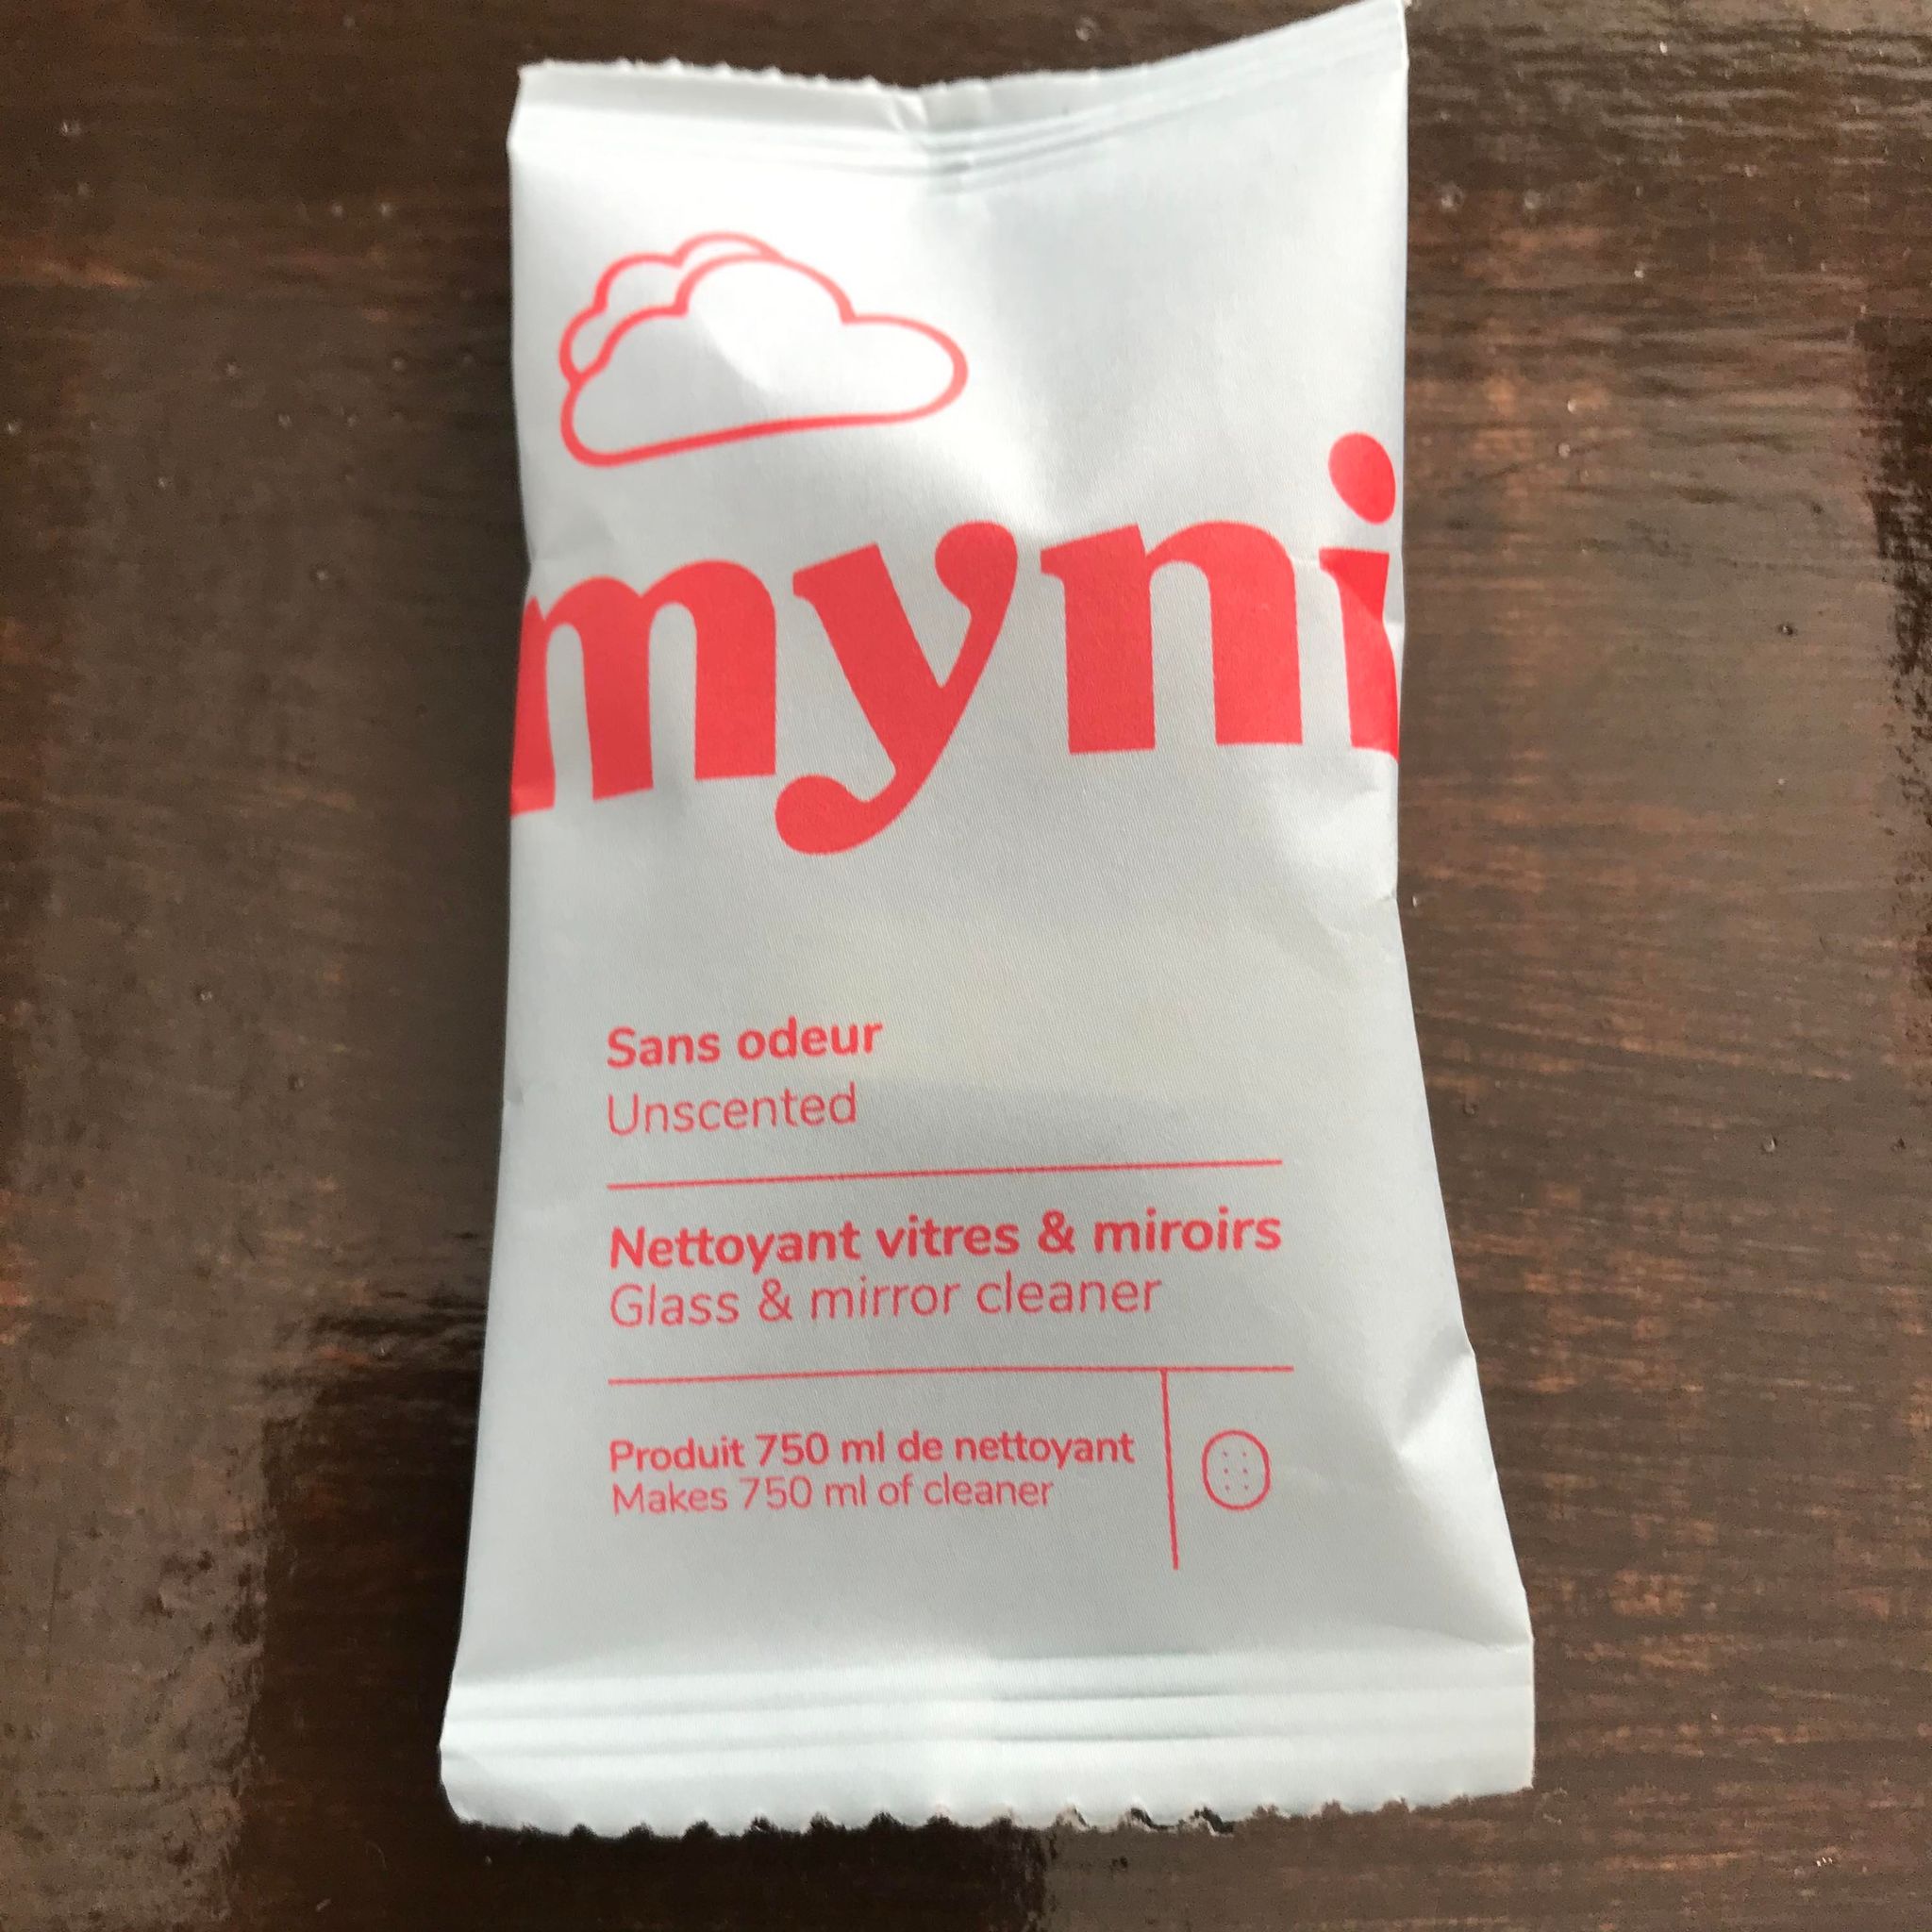 Unscented glass and mirror cleaner cleaning tablet concentrate in a compostable pouch made in canada by myni